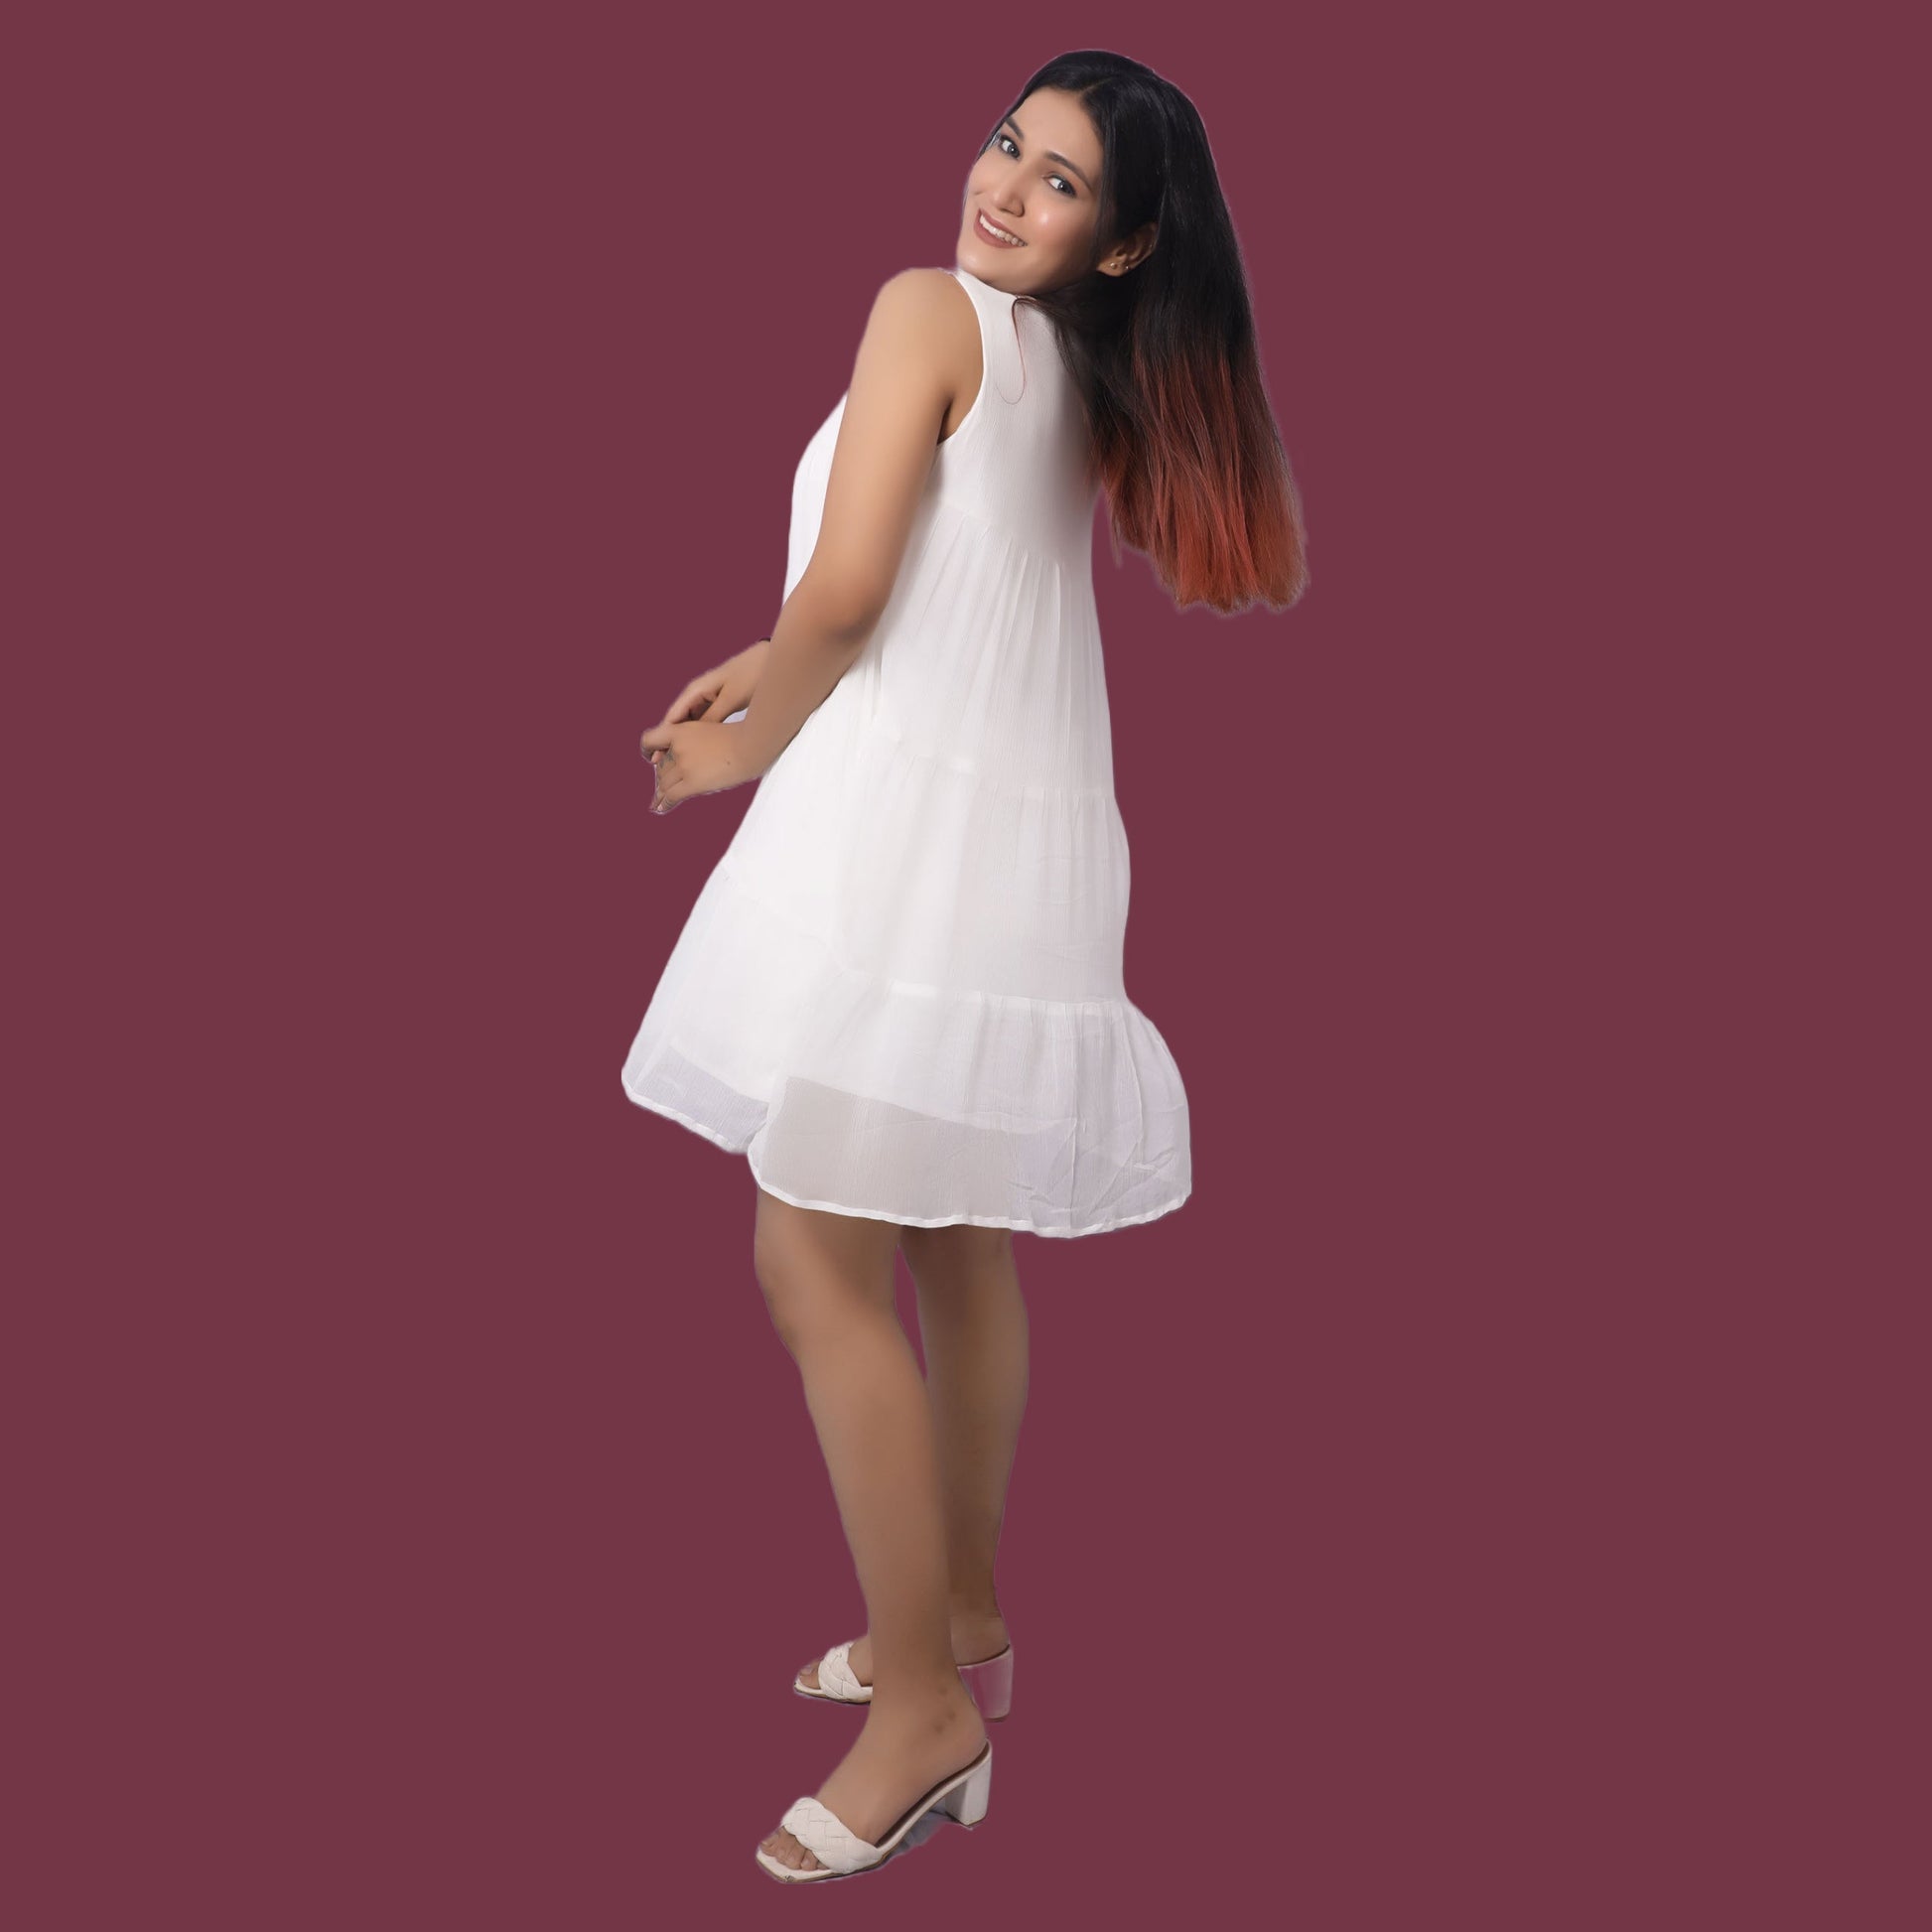 Flared White One Piece Dress For Timeless Beauty | GlamzLife